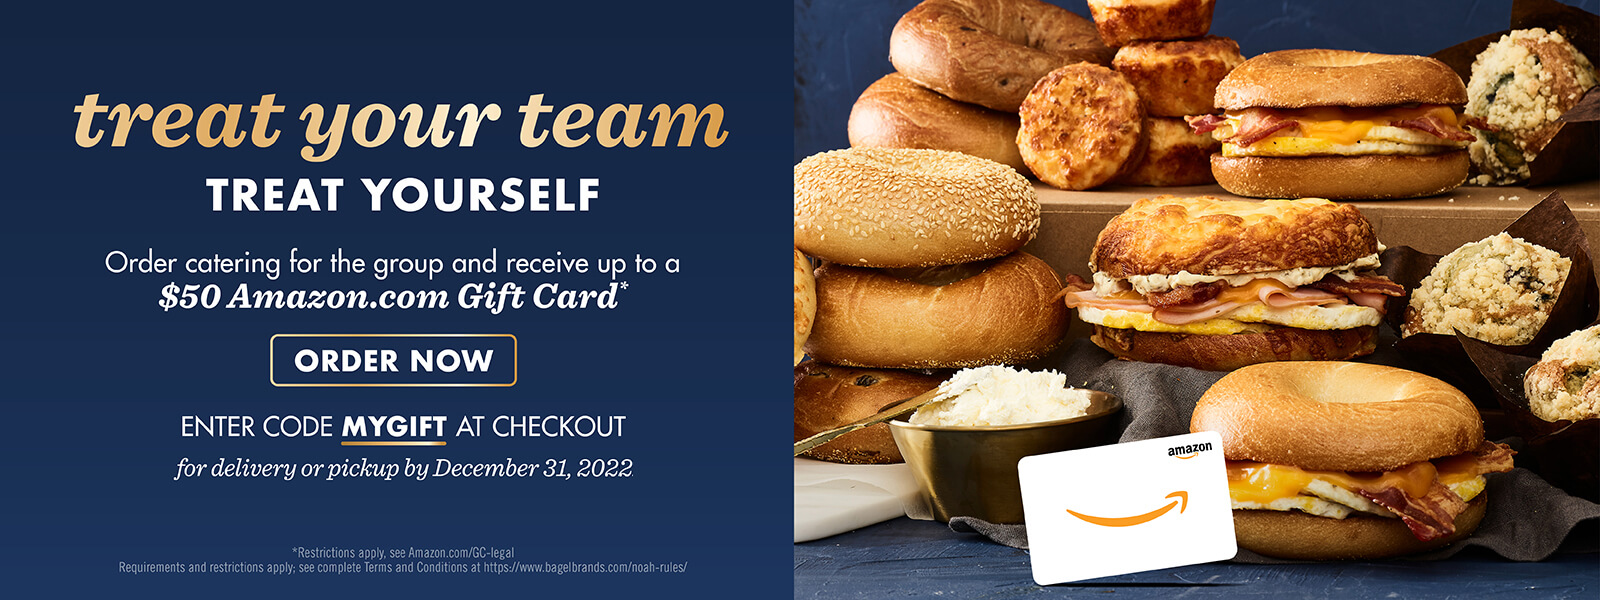 Order catering and receive up to a $50 Amazon.com gift card. Order now and enter promo code MYGIFT at checkout. For delivery or pickup by December 31, 2022.